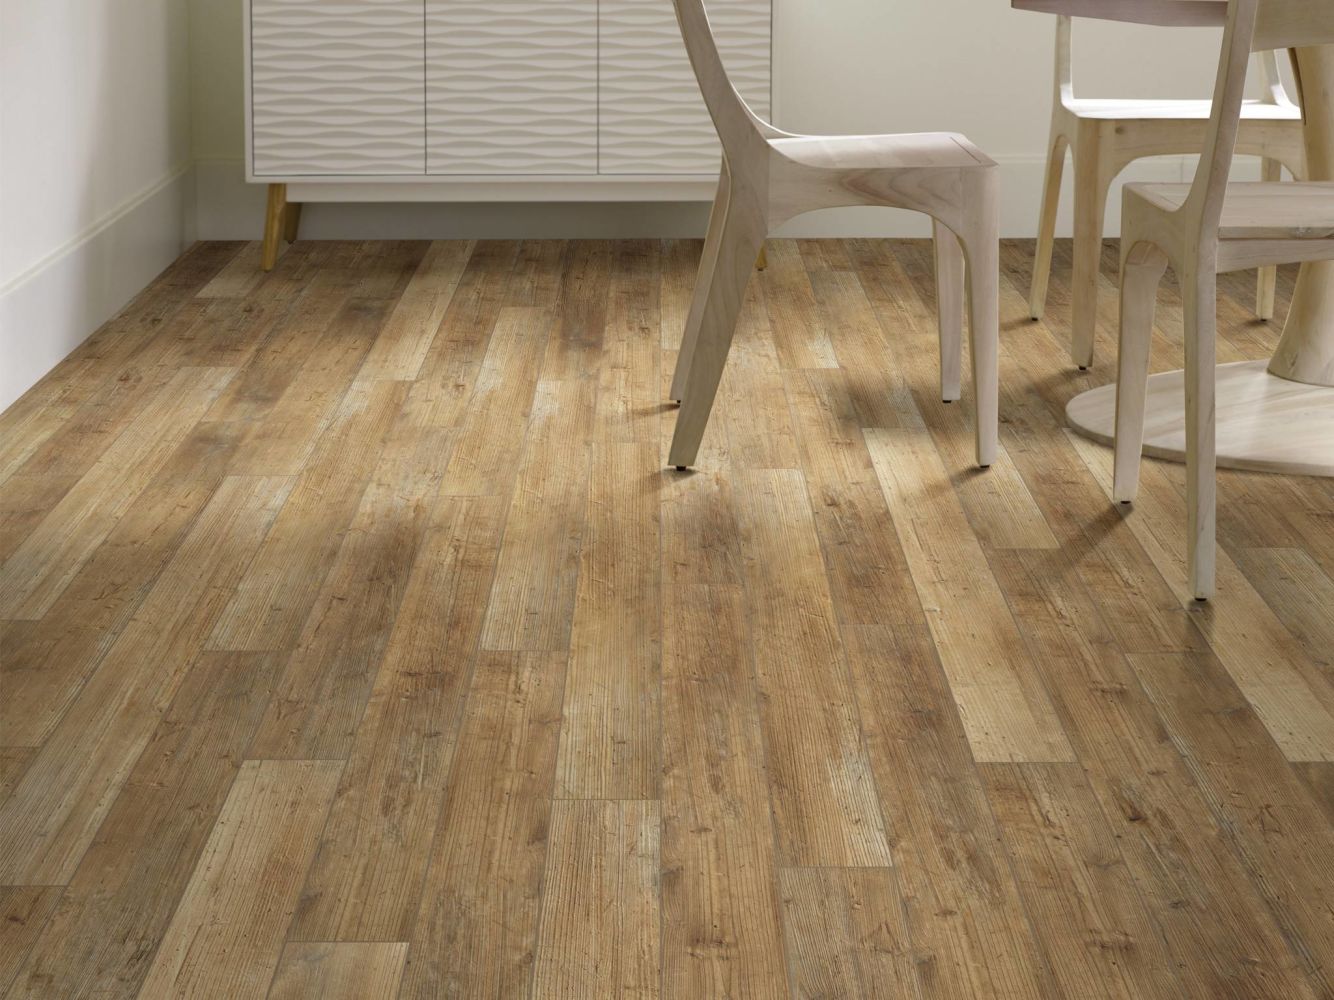 Shaw Floors Sumitomo Forestry Vermillion 5″ Touch Pine 00690_SA3SF